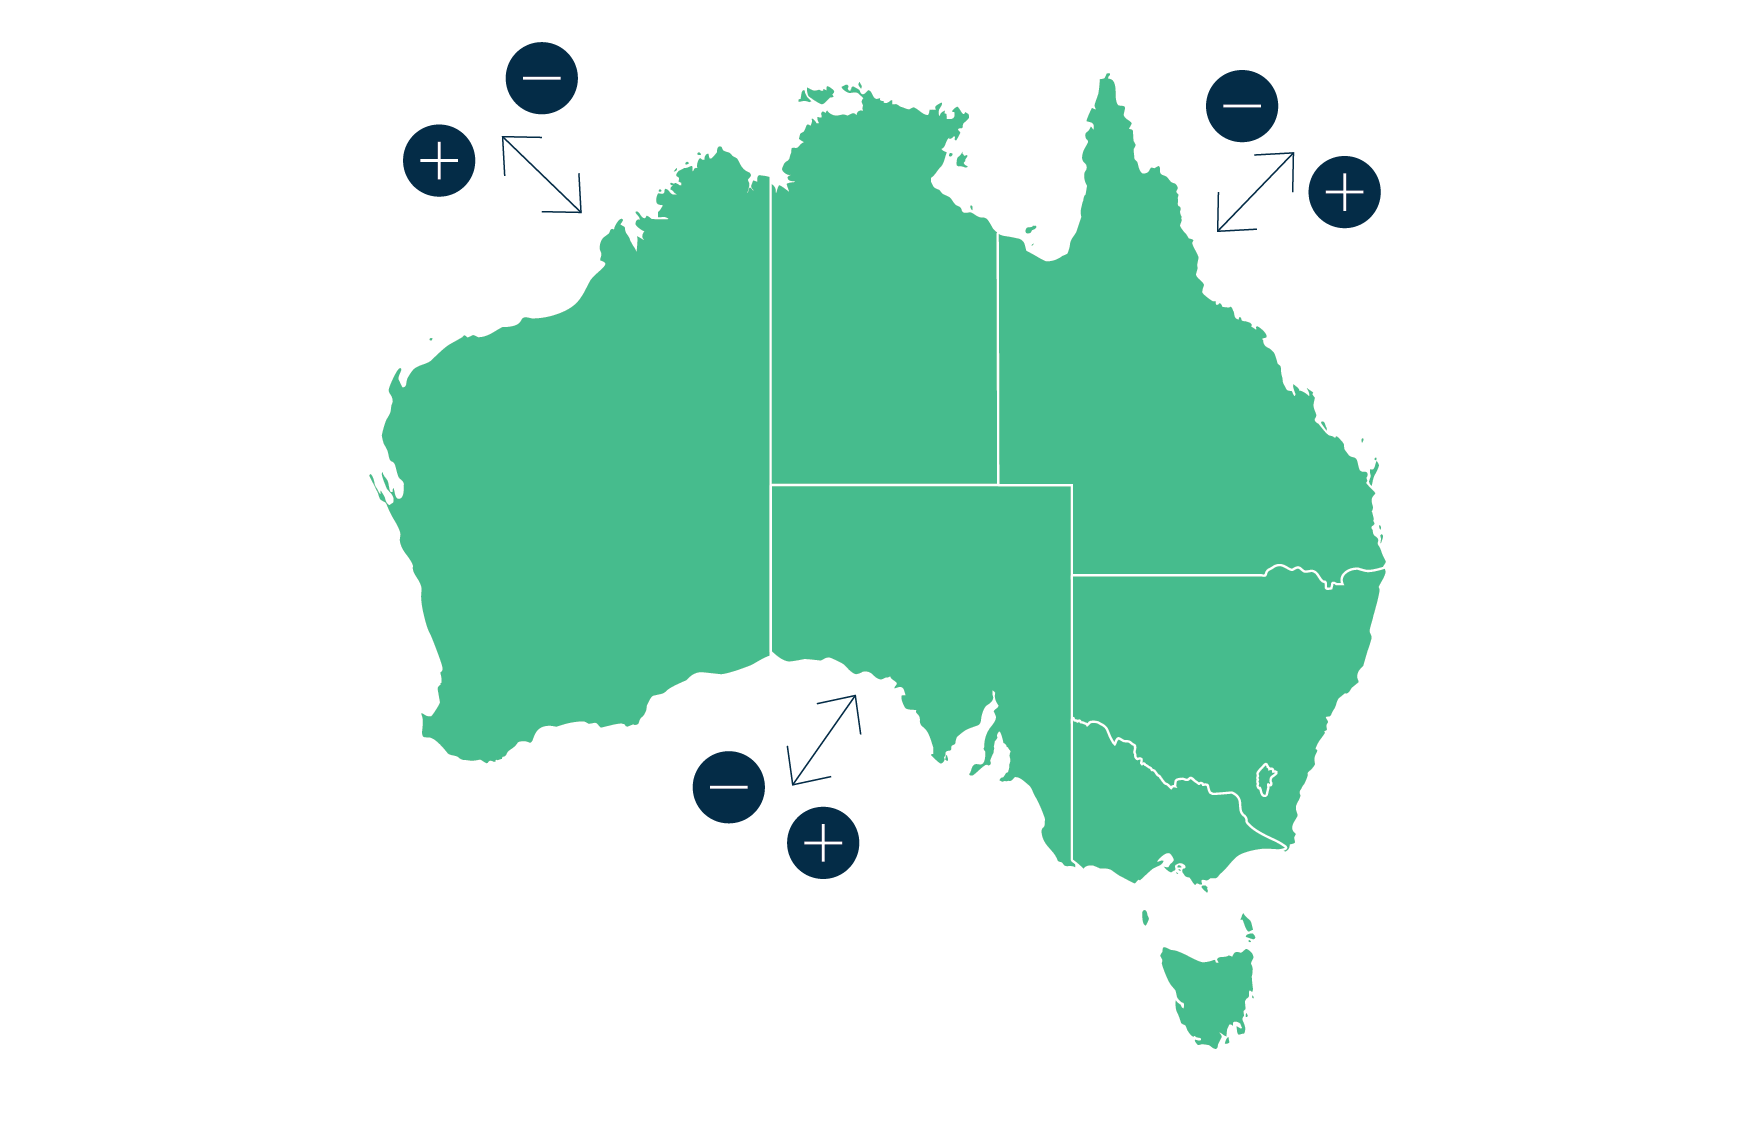 This infographic shows a map of Australia with arrows, and plus and minus signs, to symbolise the effects of immigration and emigration on population change